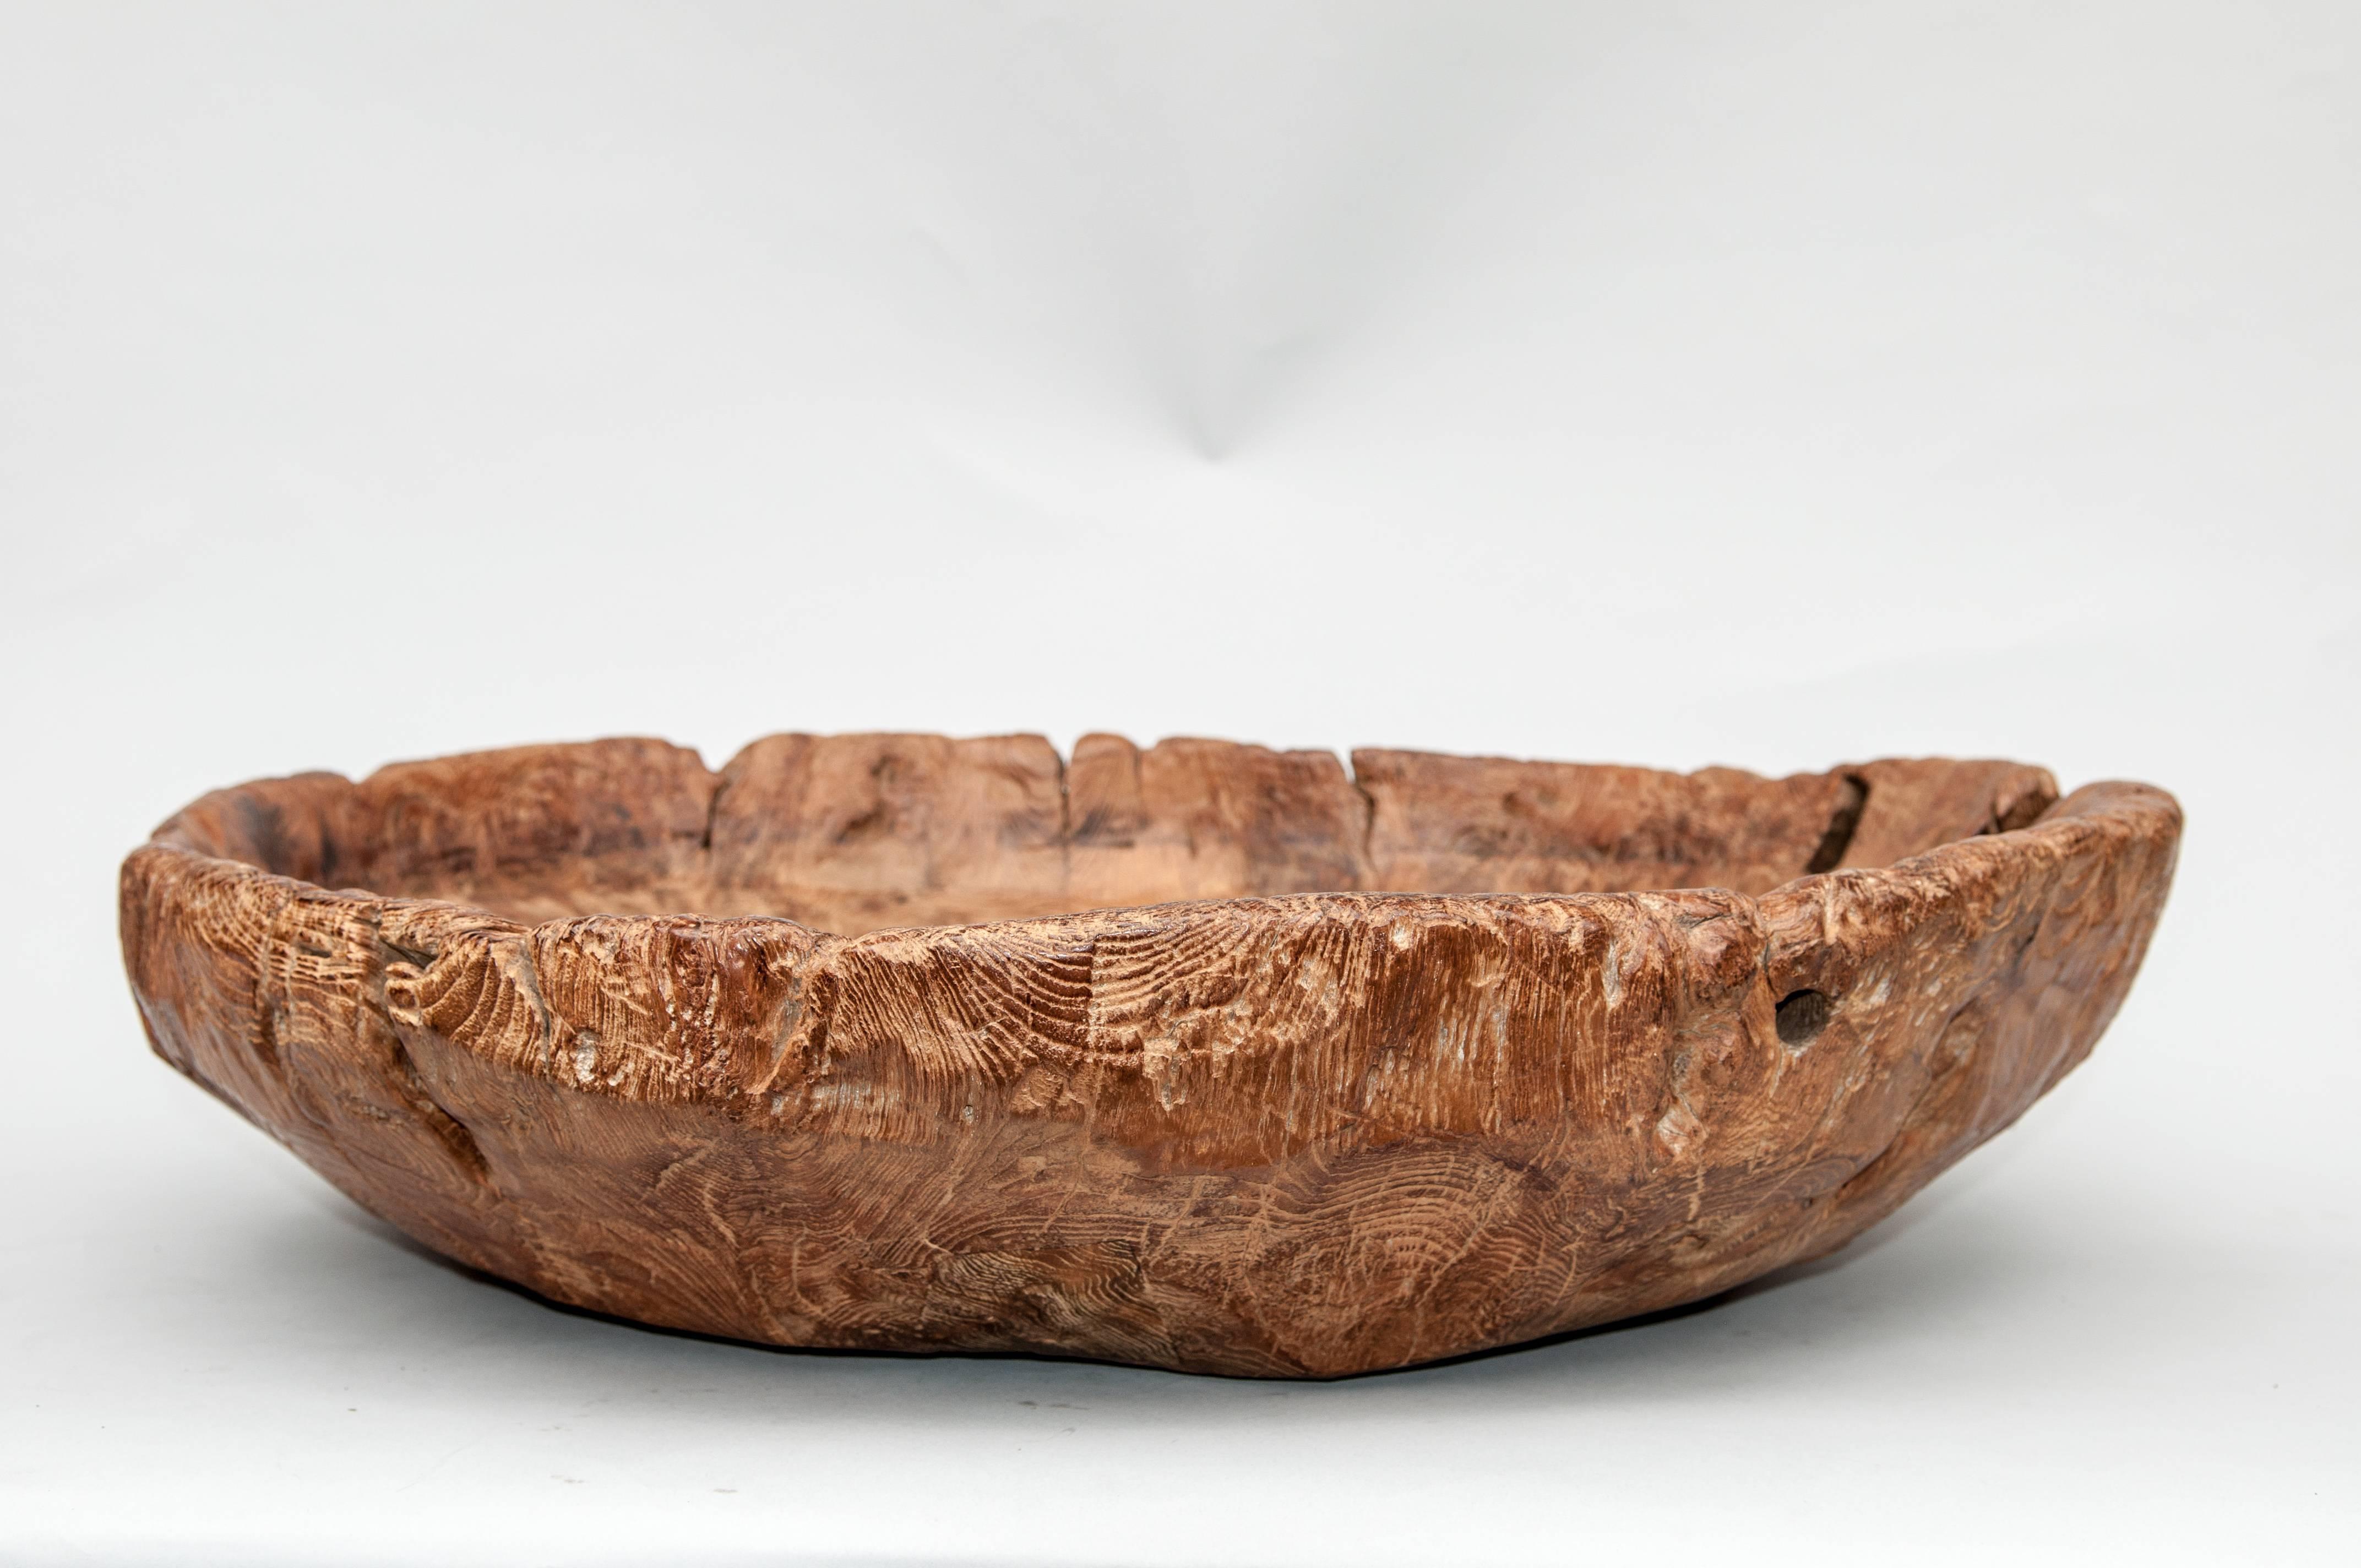 Large rustic teak bowl fashioned from an old Mortar. Java, late 20th century.
This rustic wooden teak bowl was fashioned by hand from a single piece of very old and very rugged teak, most probably from an old teak mortar from Madura, Java, an area